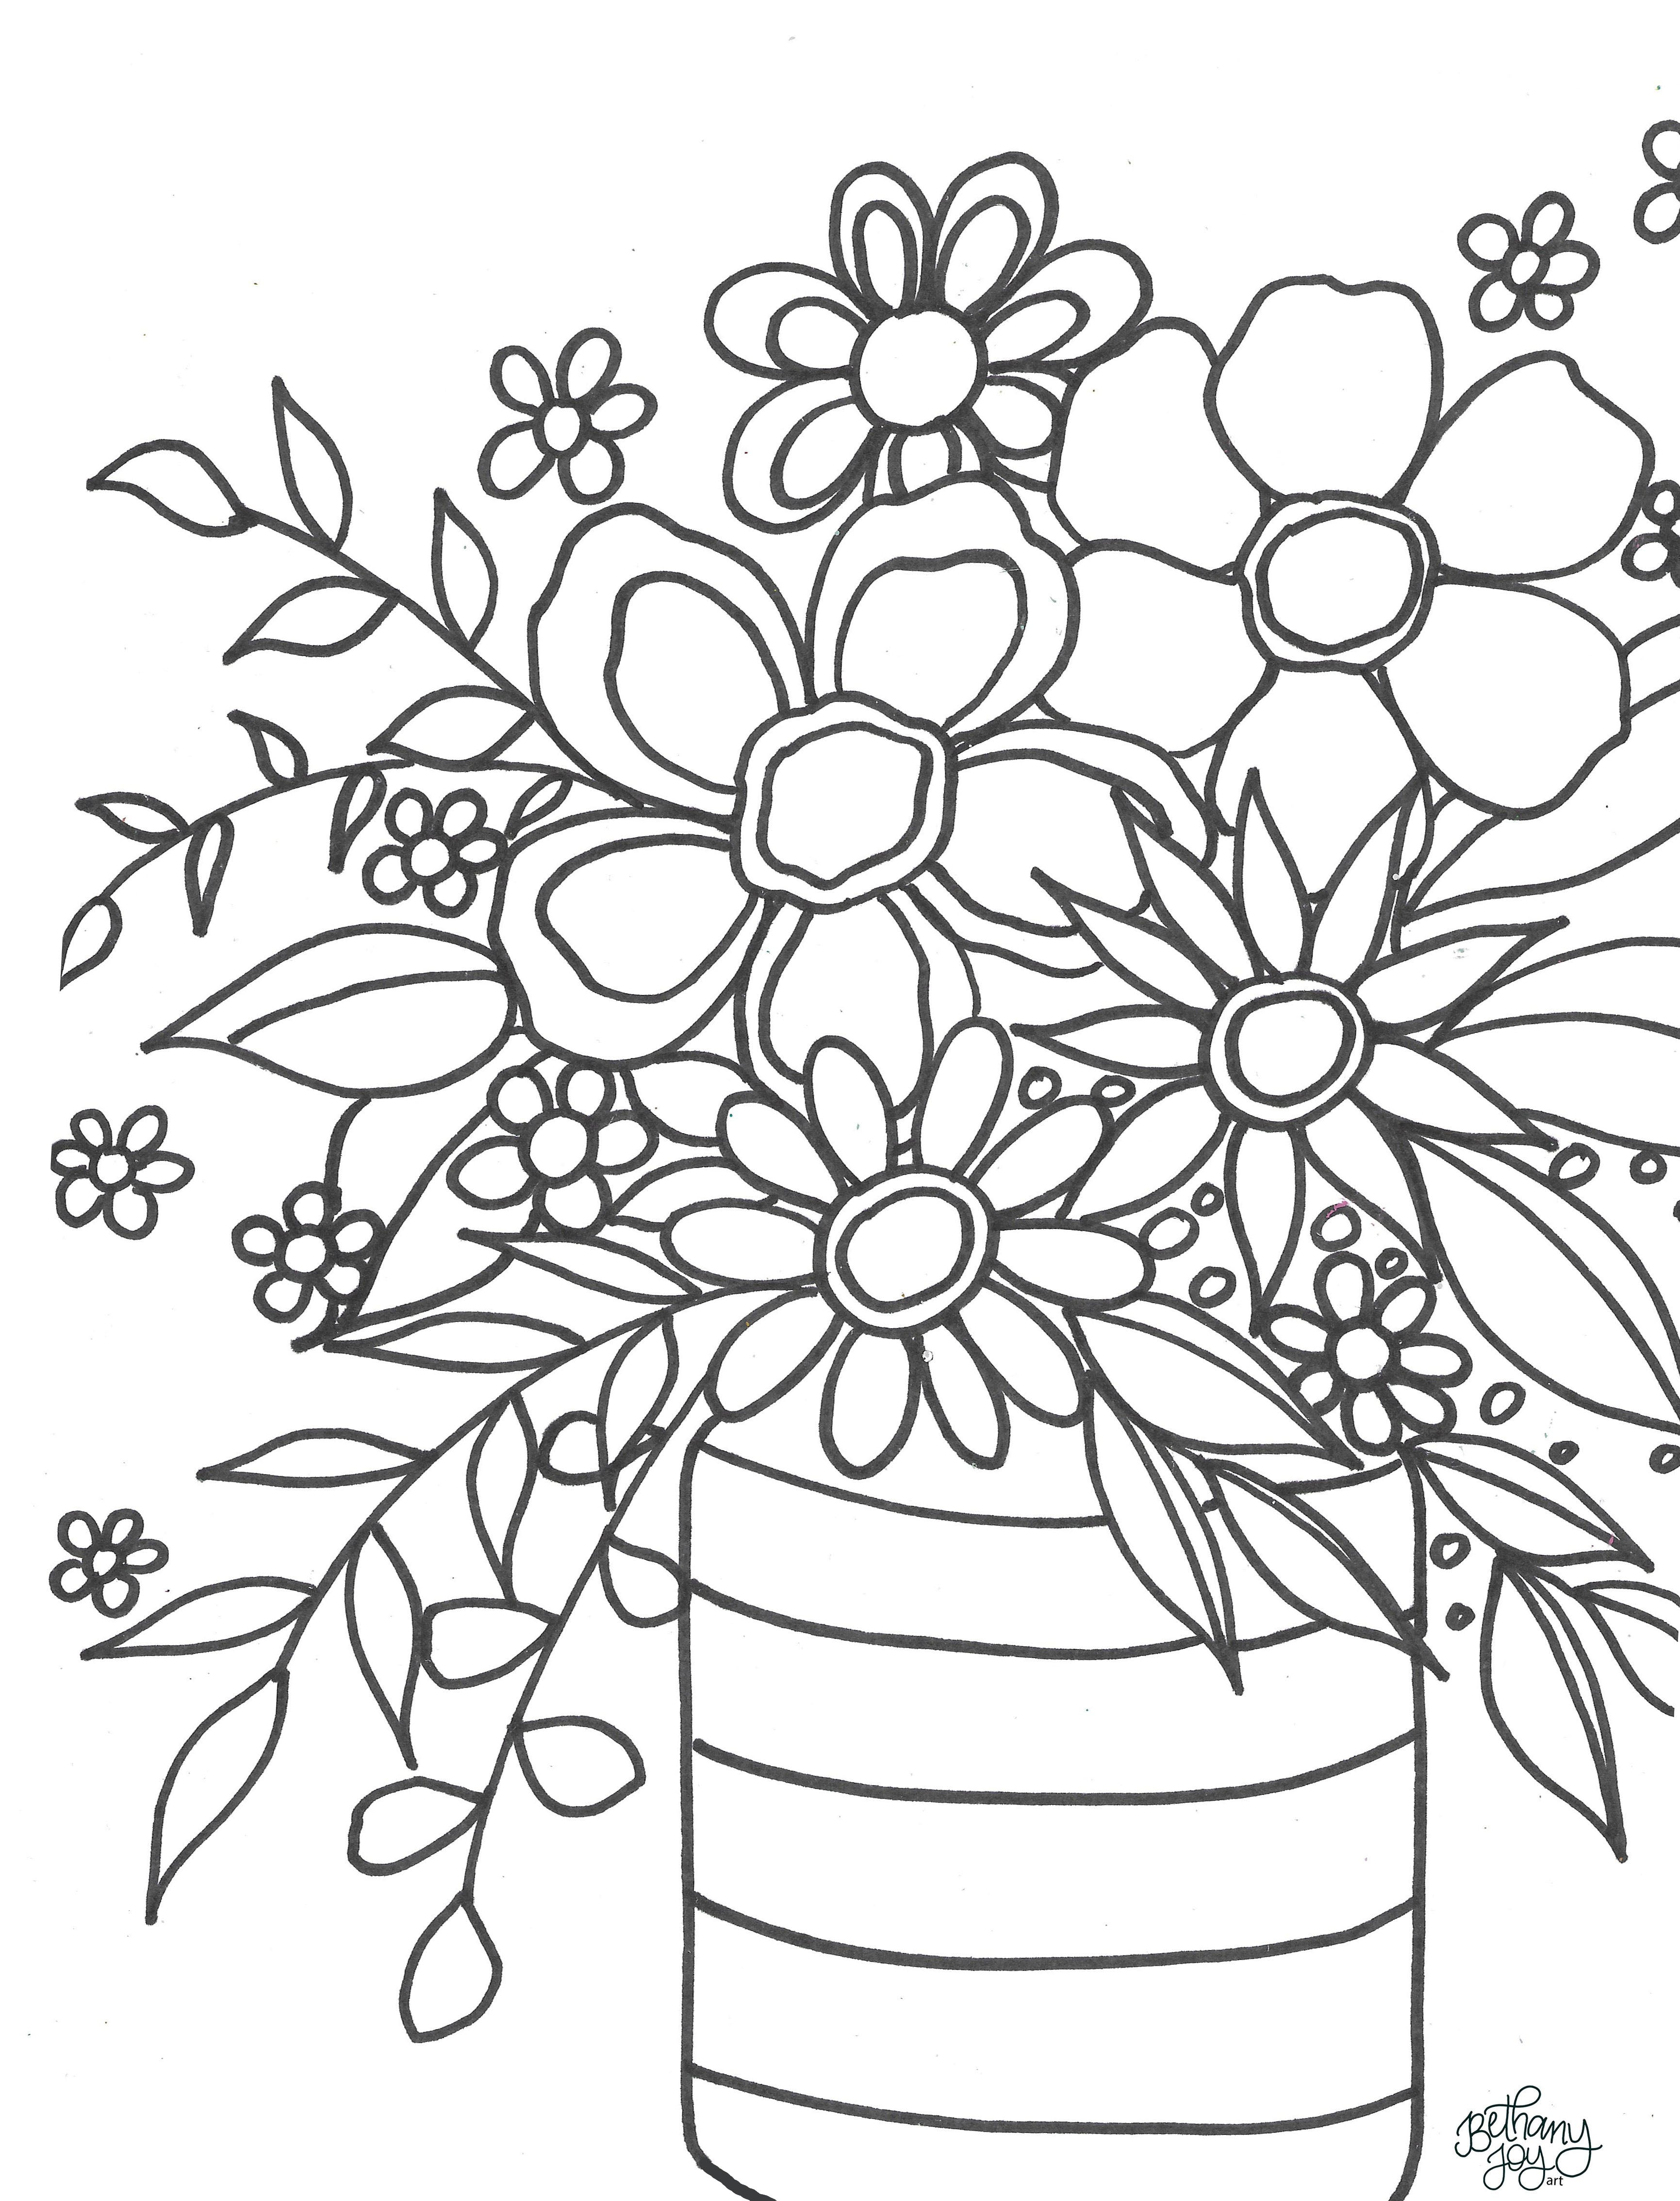 Fun Floral Coloring Pages! – Bethany ...